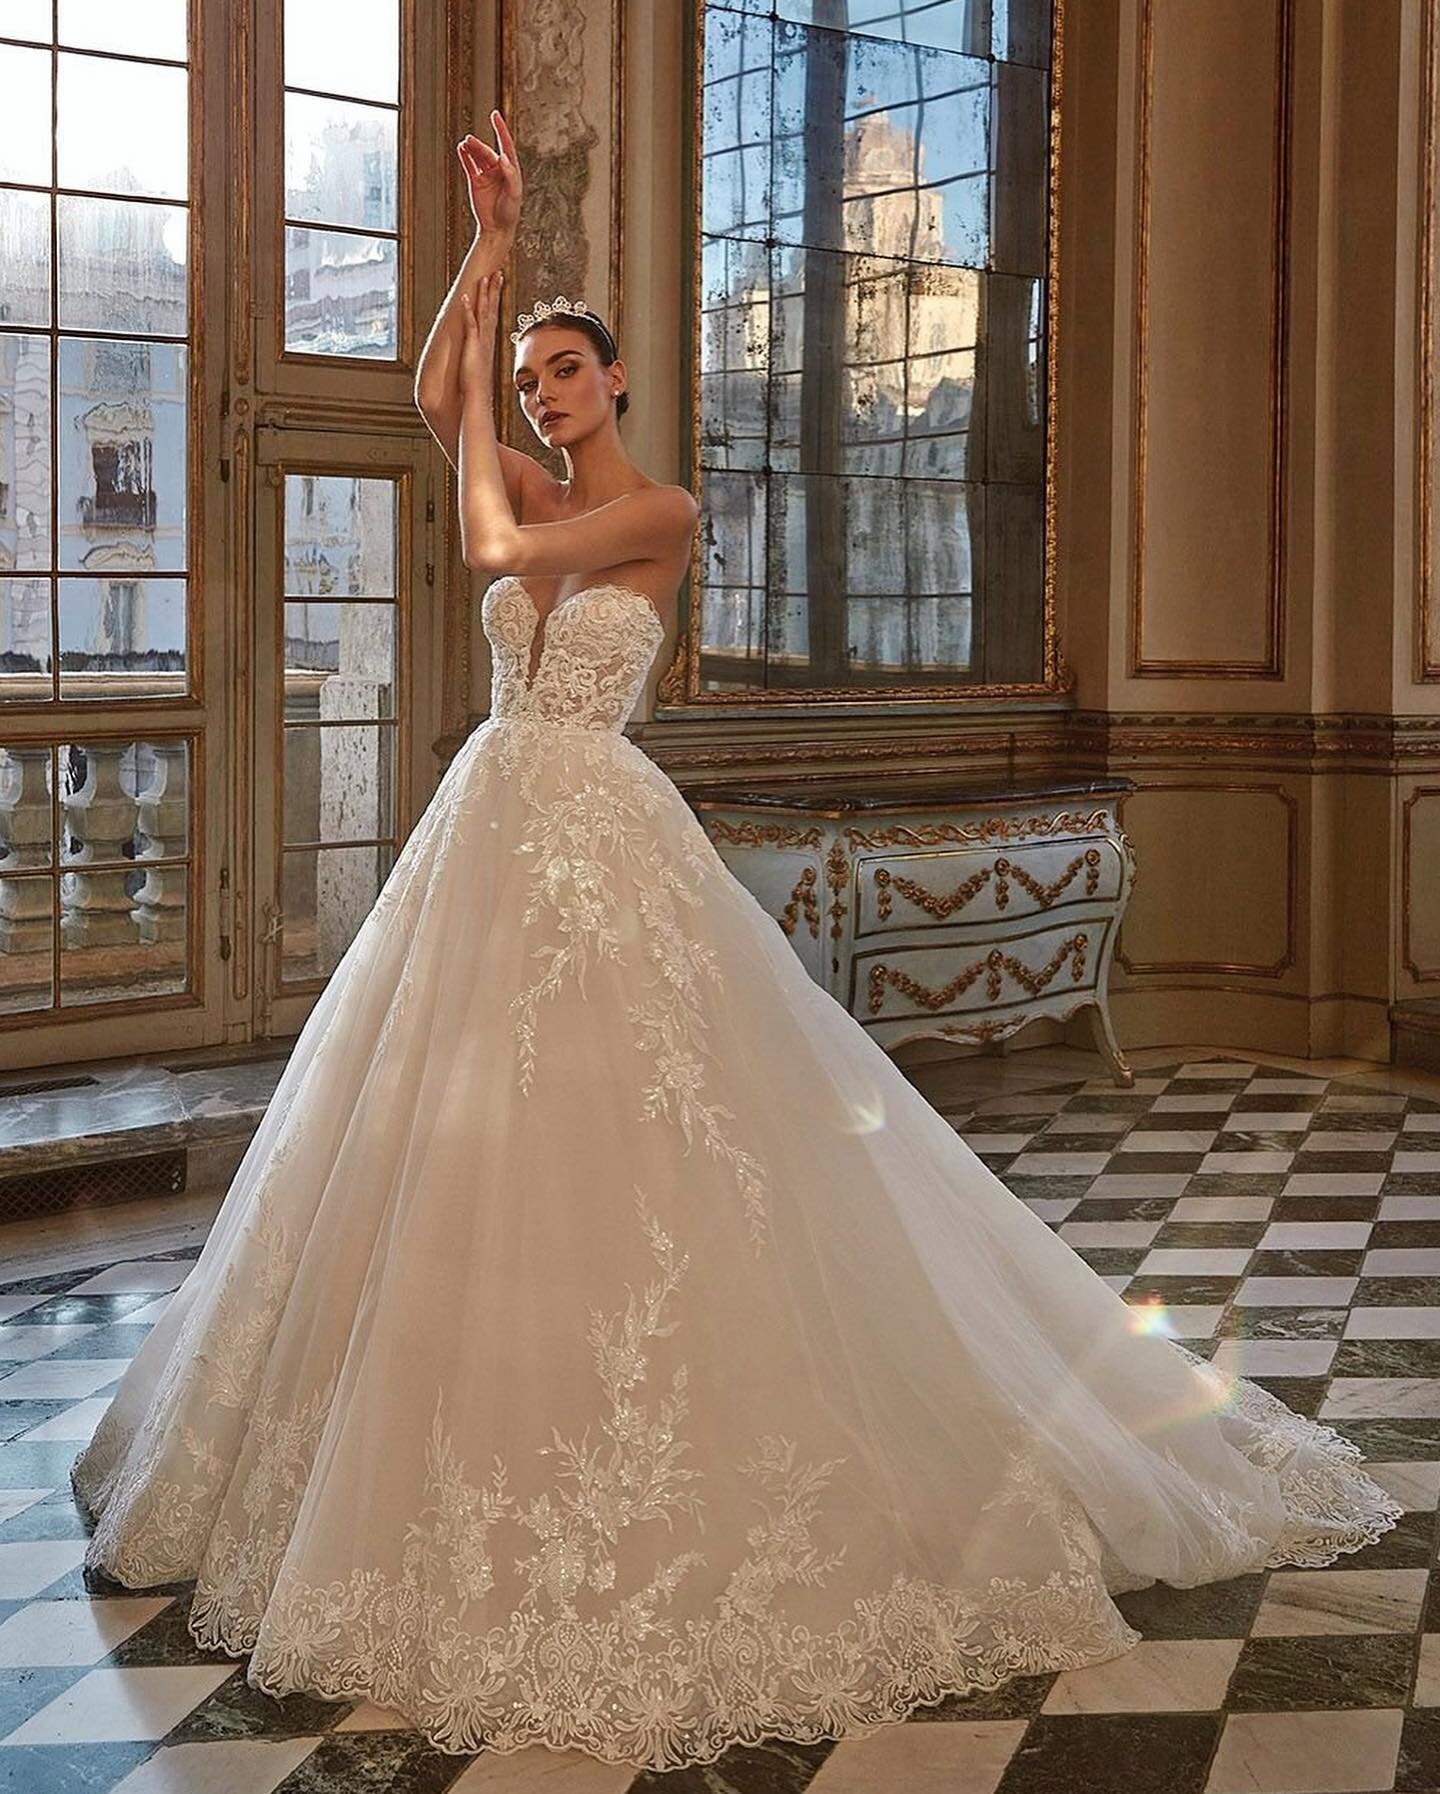 Welcoming a New Era: JJ's House in London's Bridal Fashion Scene | Weddings  and Honeymoons